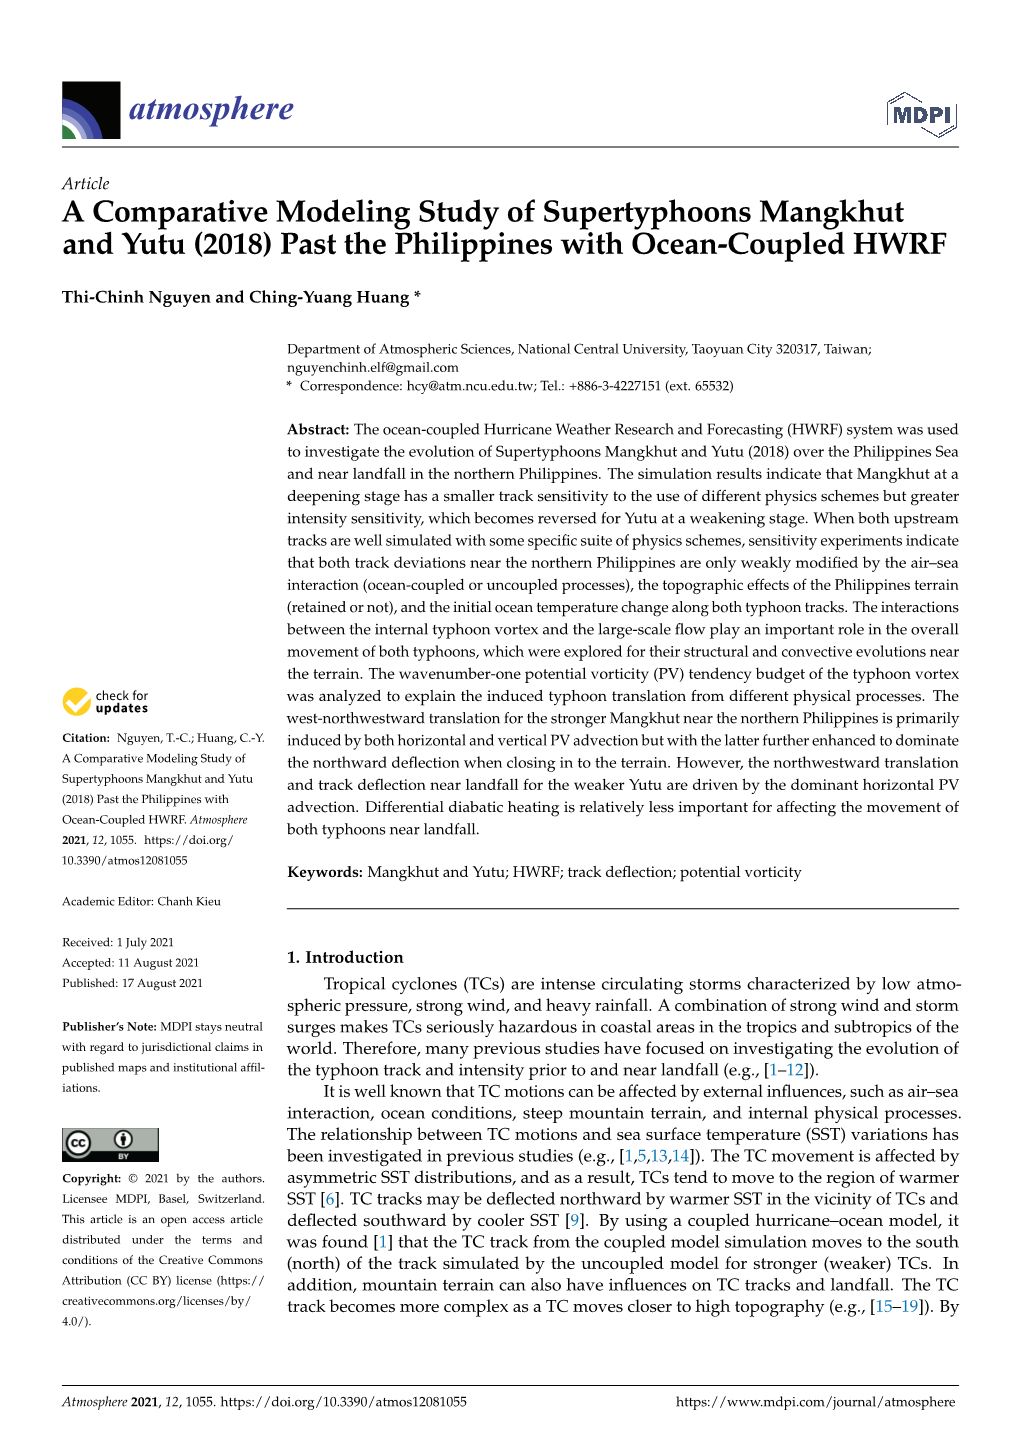 A Comparative Modeling Study of Supertyphoons Mangkhut and Yutu (2018) Past the Philippines with Ocean-Coupled HWRF